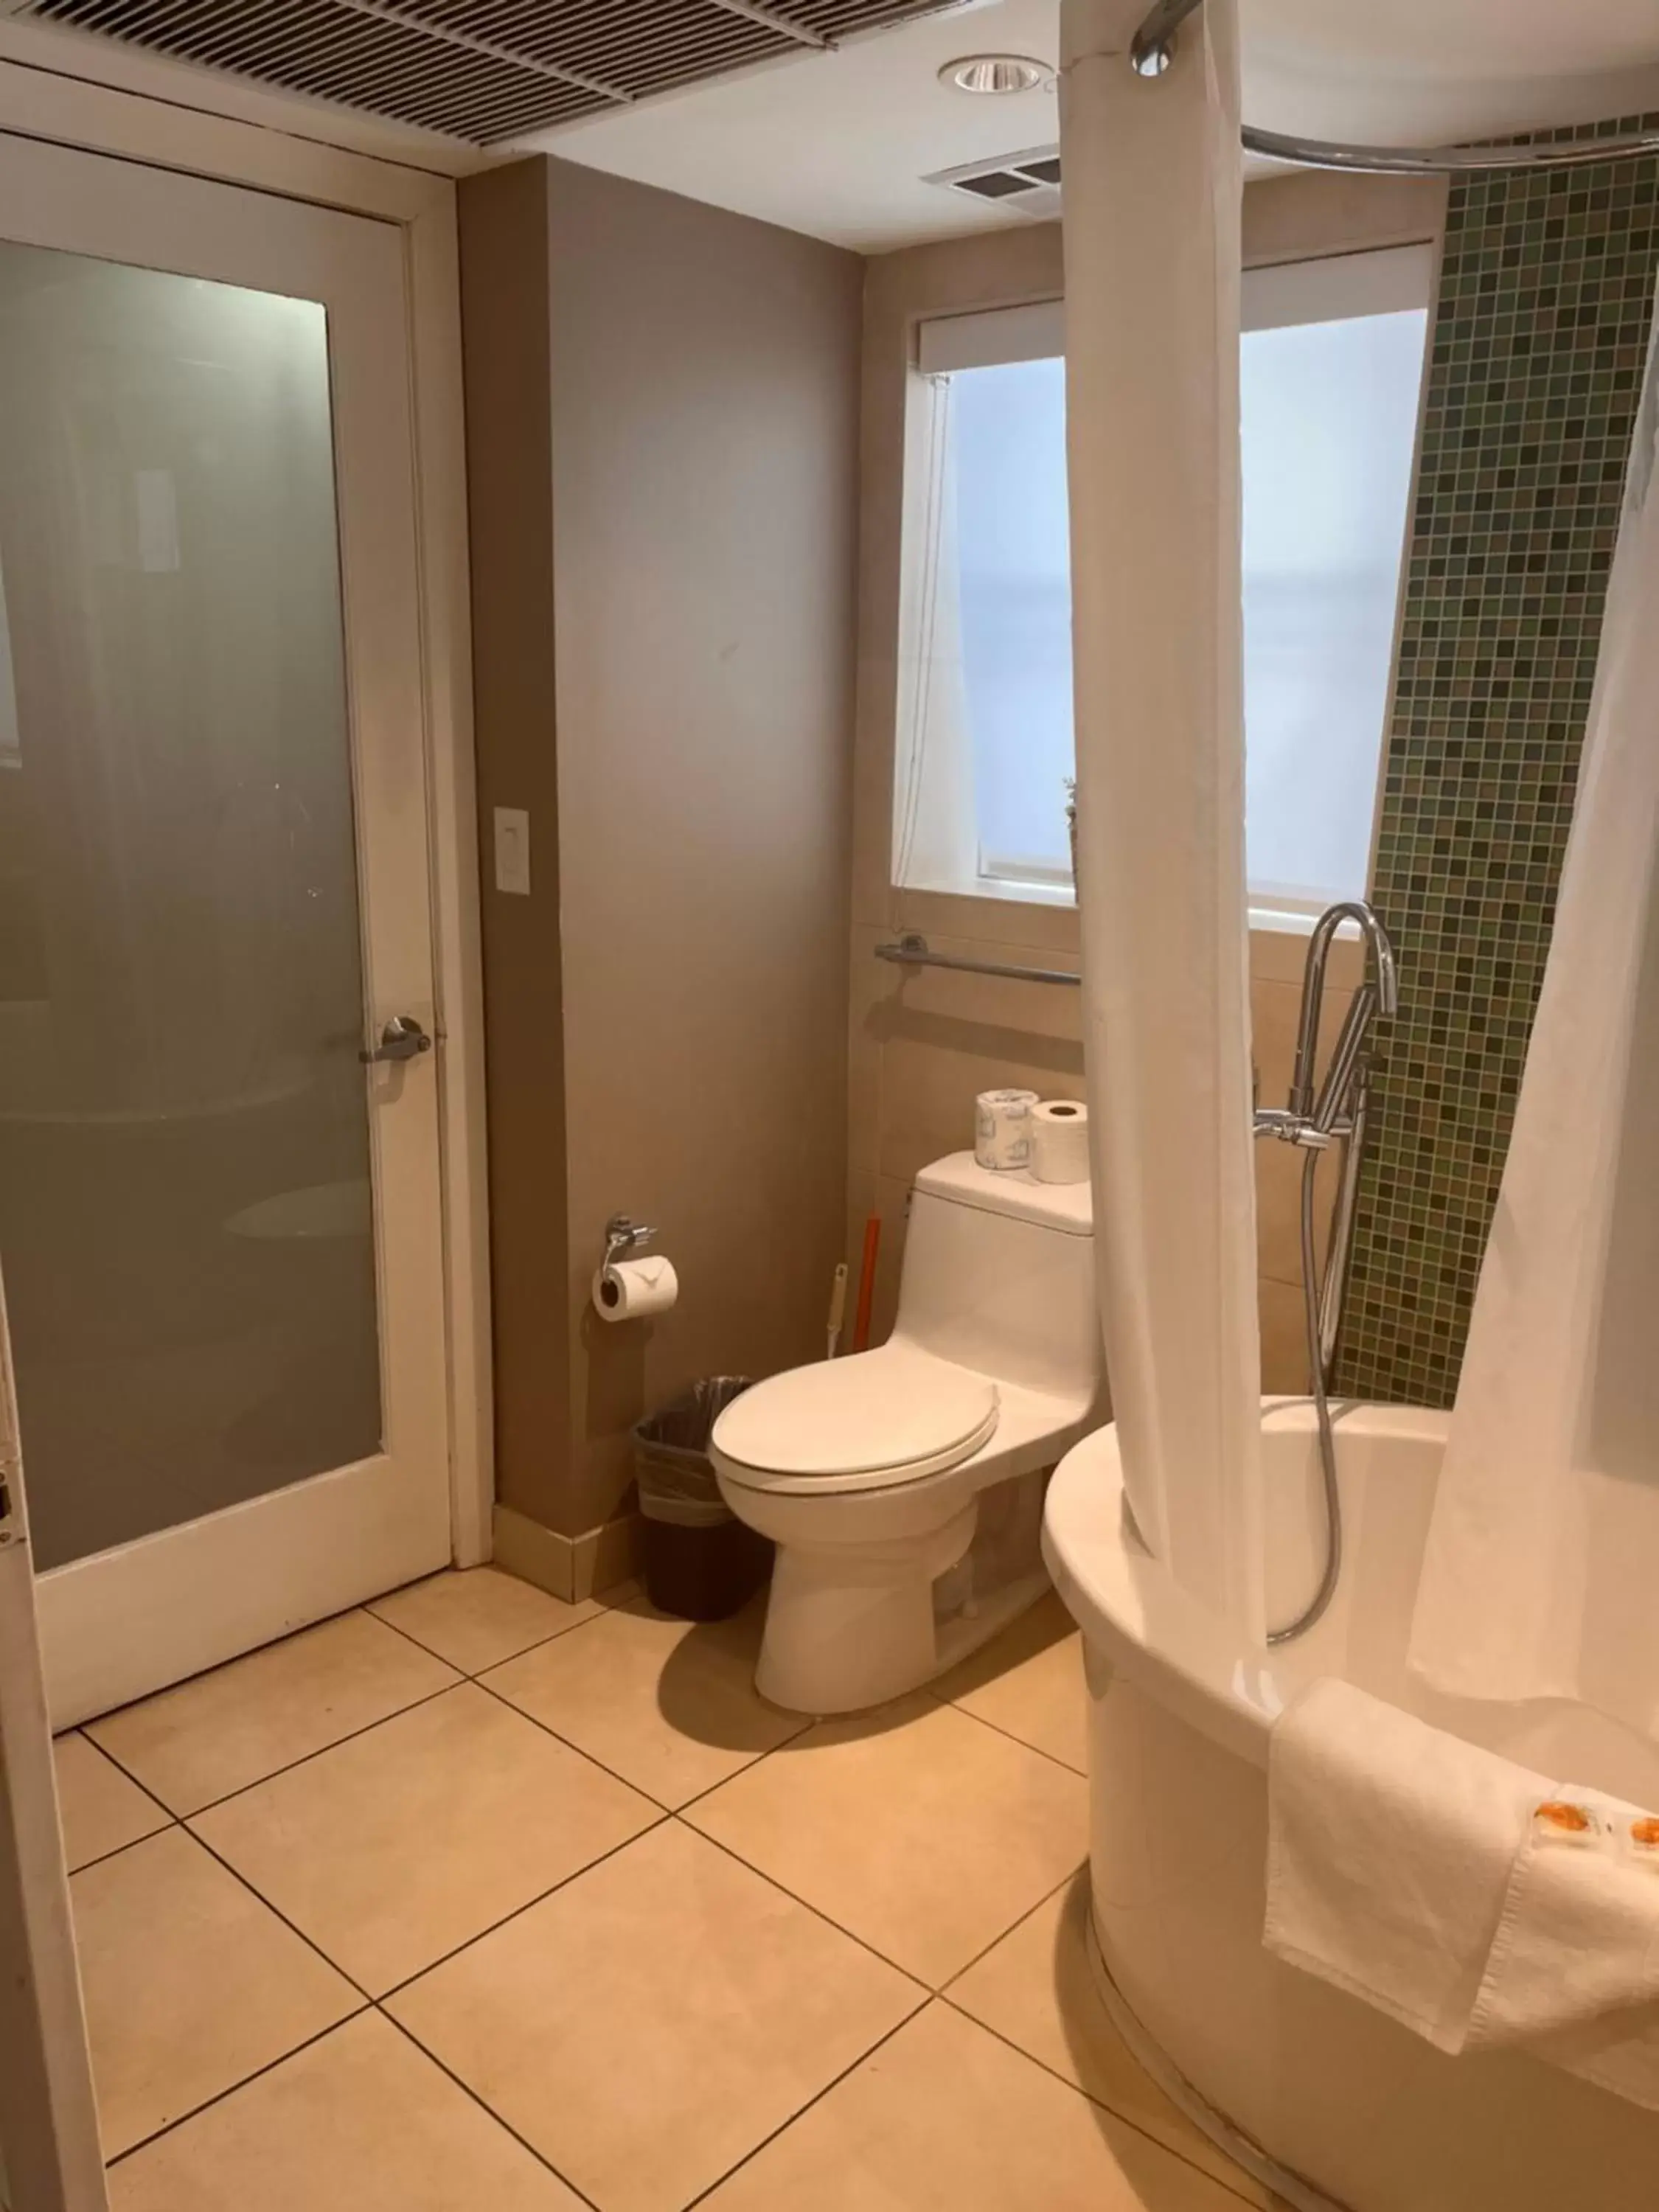 Bathroom in Suites at The Strand on Ocean Drive